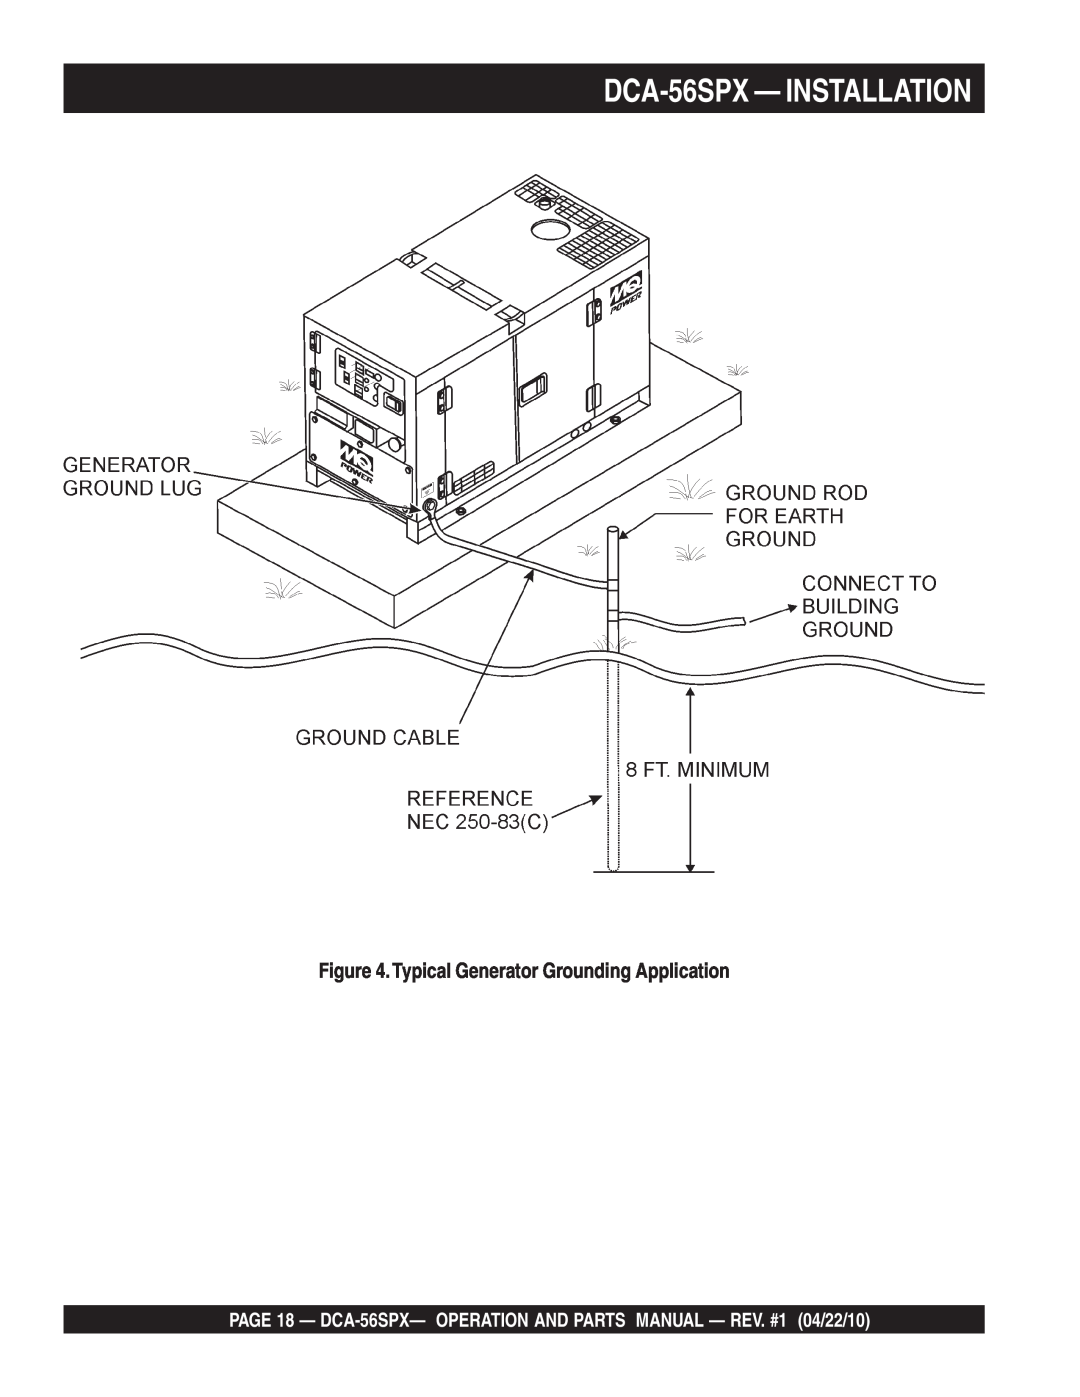 Multiquip operation manual DCA-56SPX- INSTALLATION, Typical Generator Grounding Application 